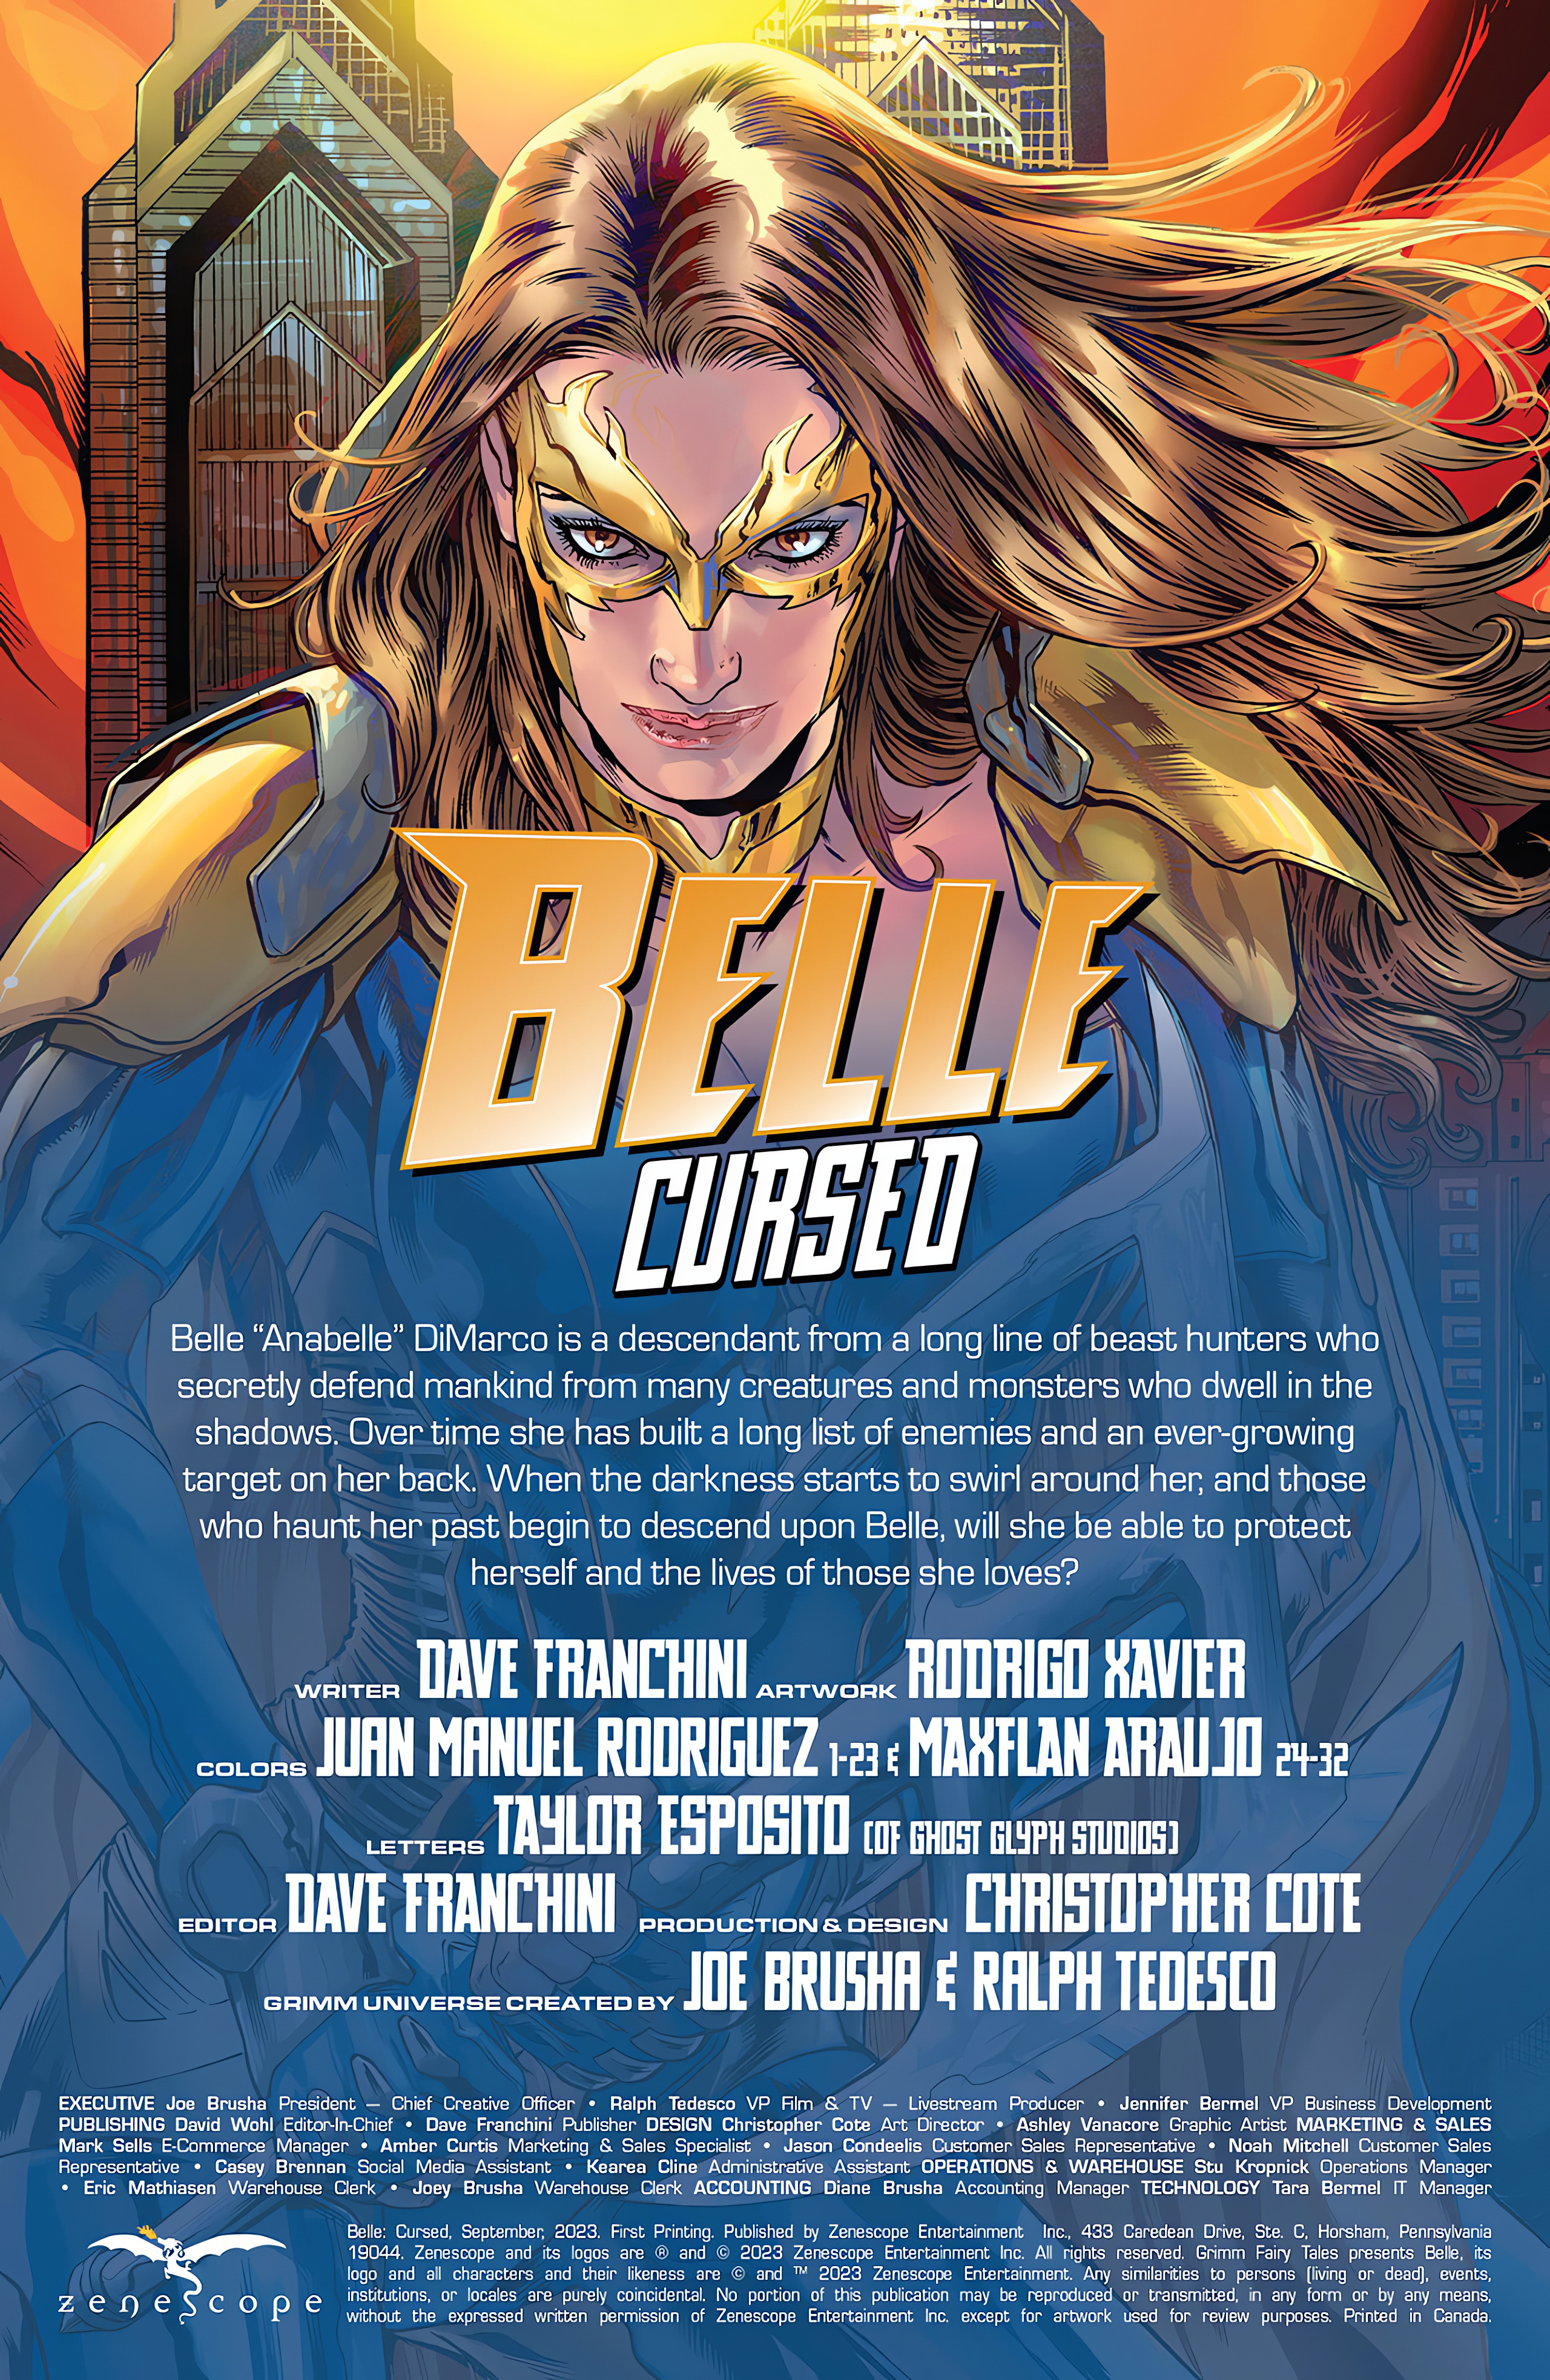 Read online Belle Cursed comic -  Issue # Full - 2